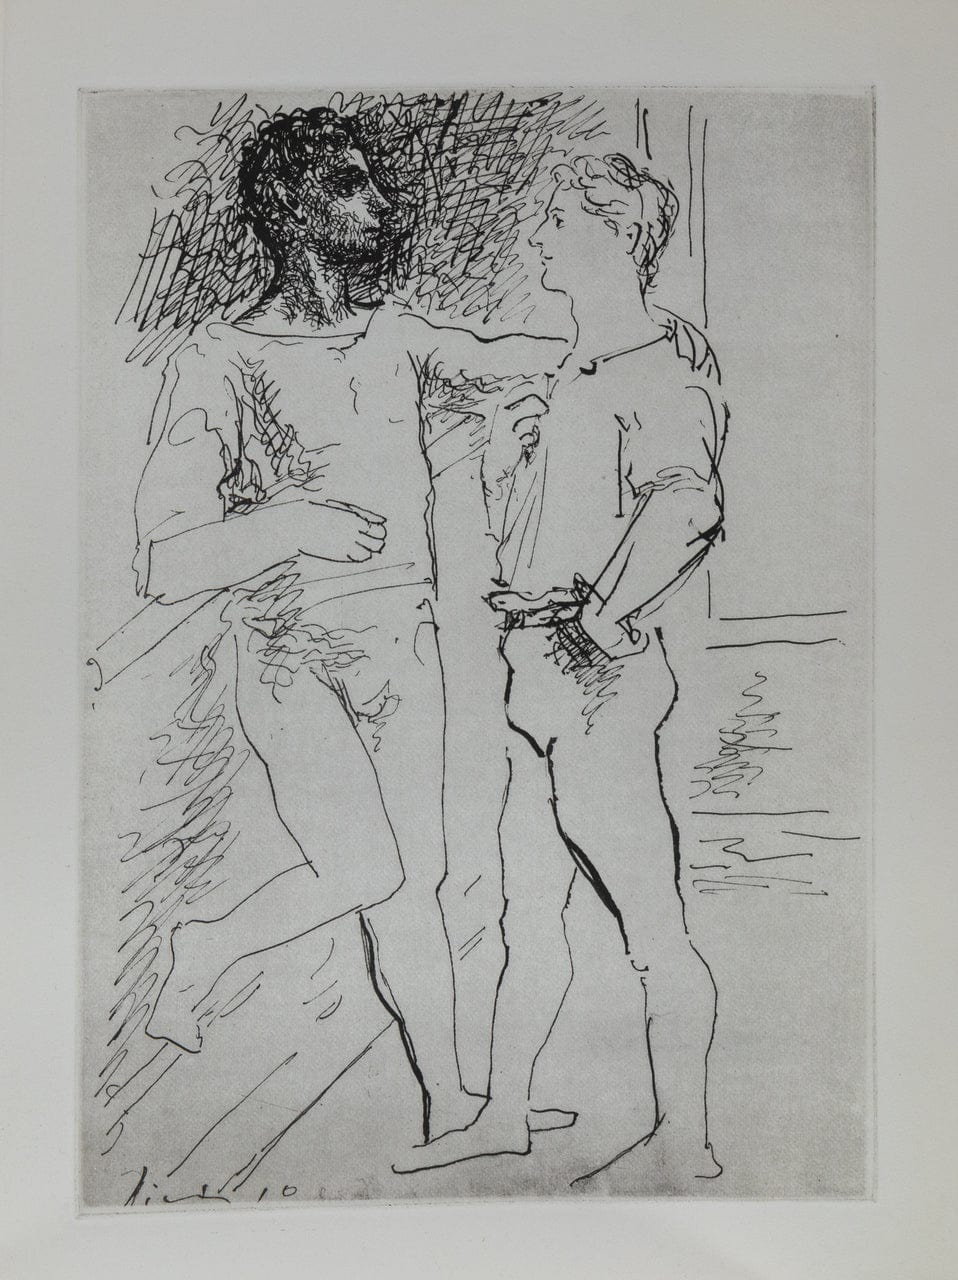 Pablo Picasso; Untitled from "Grace and Movement" 9 Front